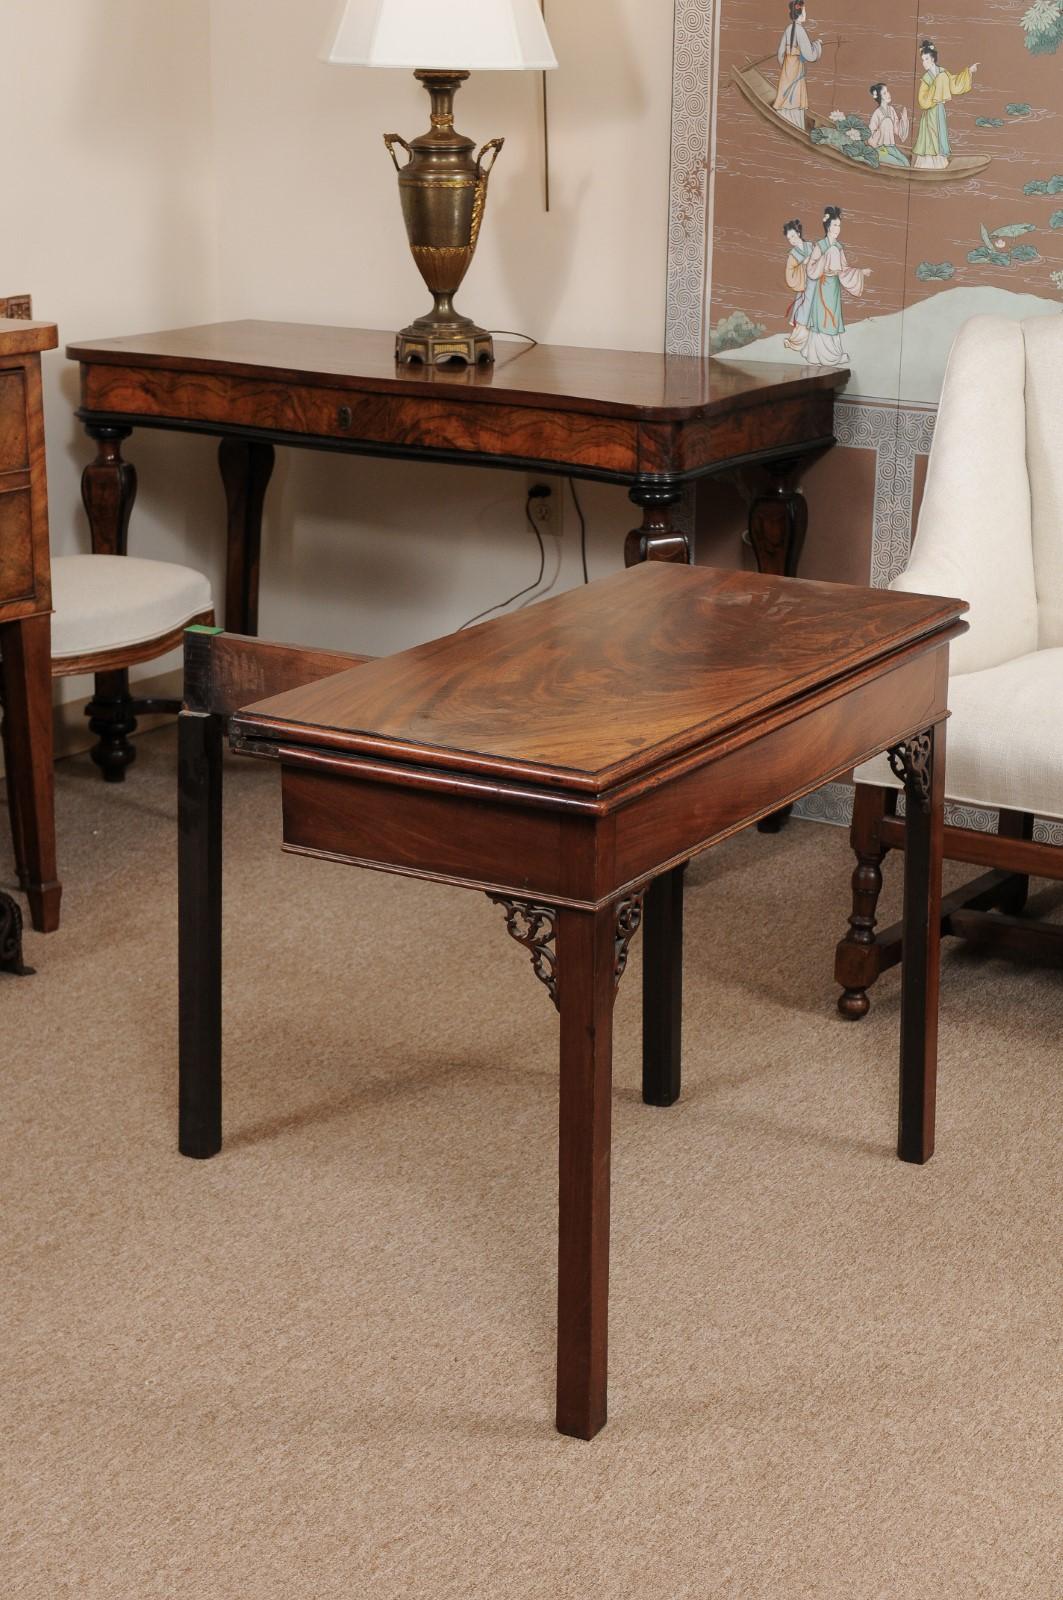 George II Period Flip-Top Tea Table with Fretwork, England ca. 1760 In Good Condition For Sale In Atlanta, GA